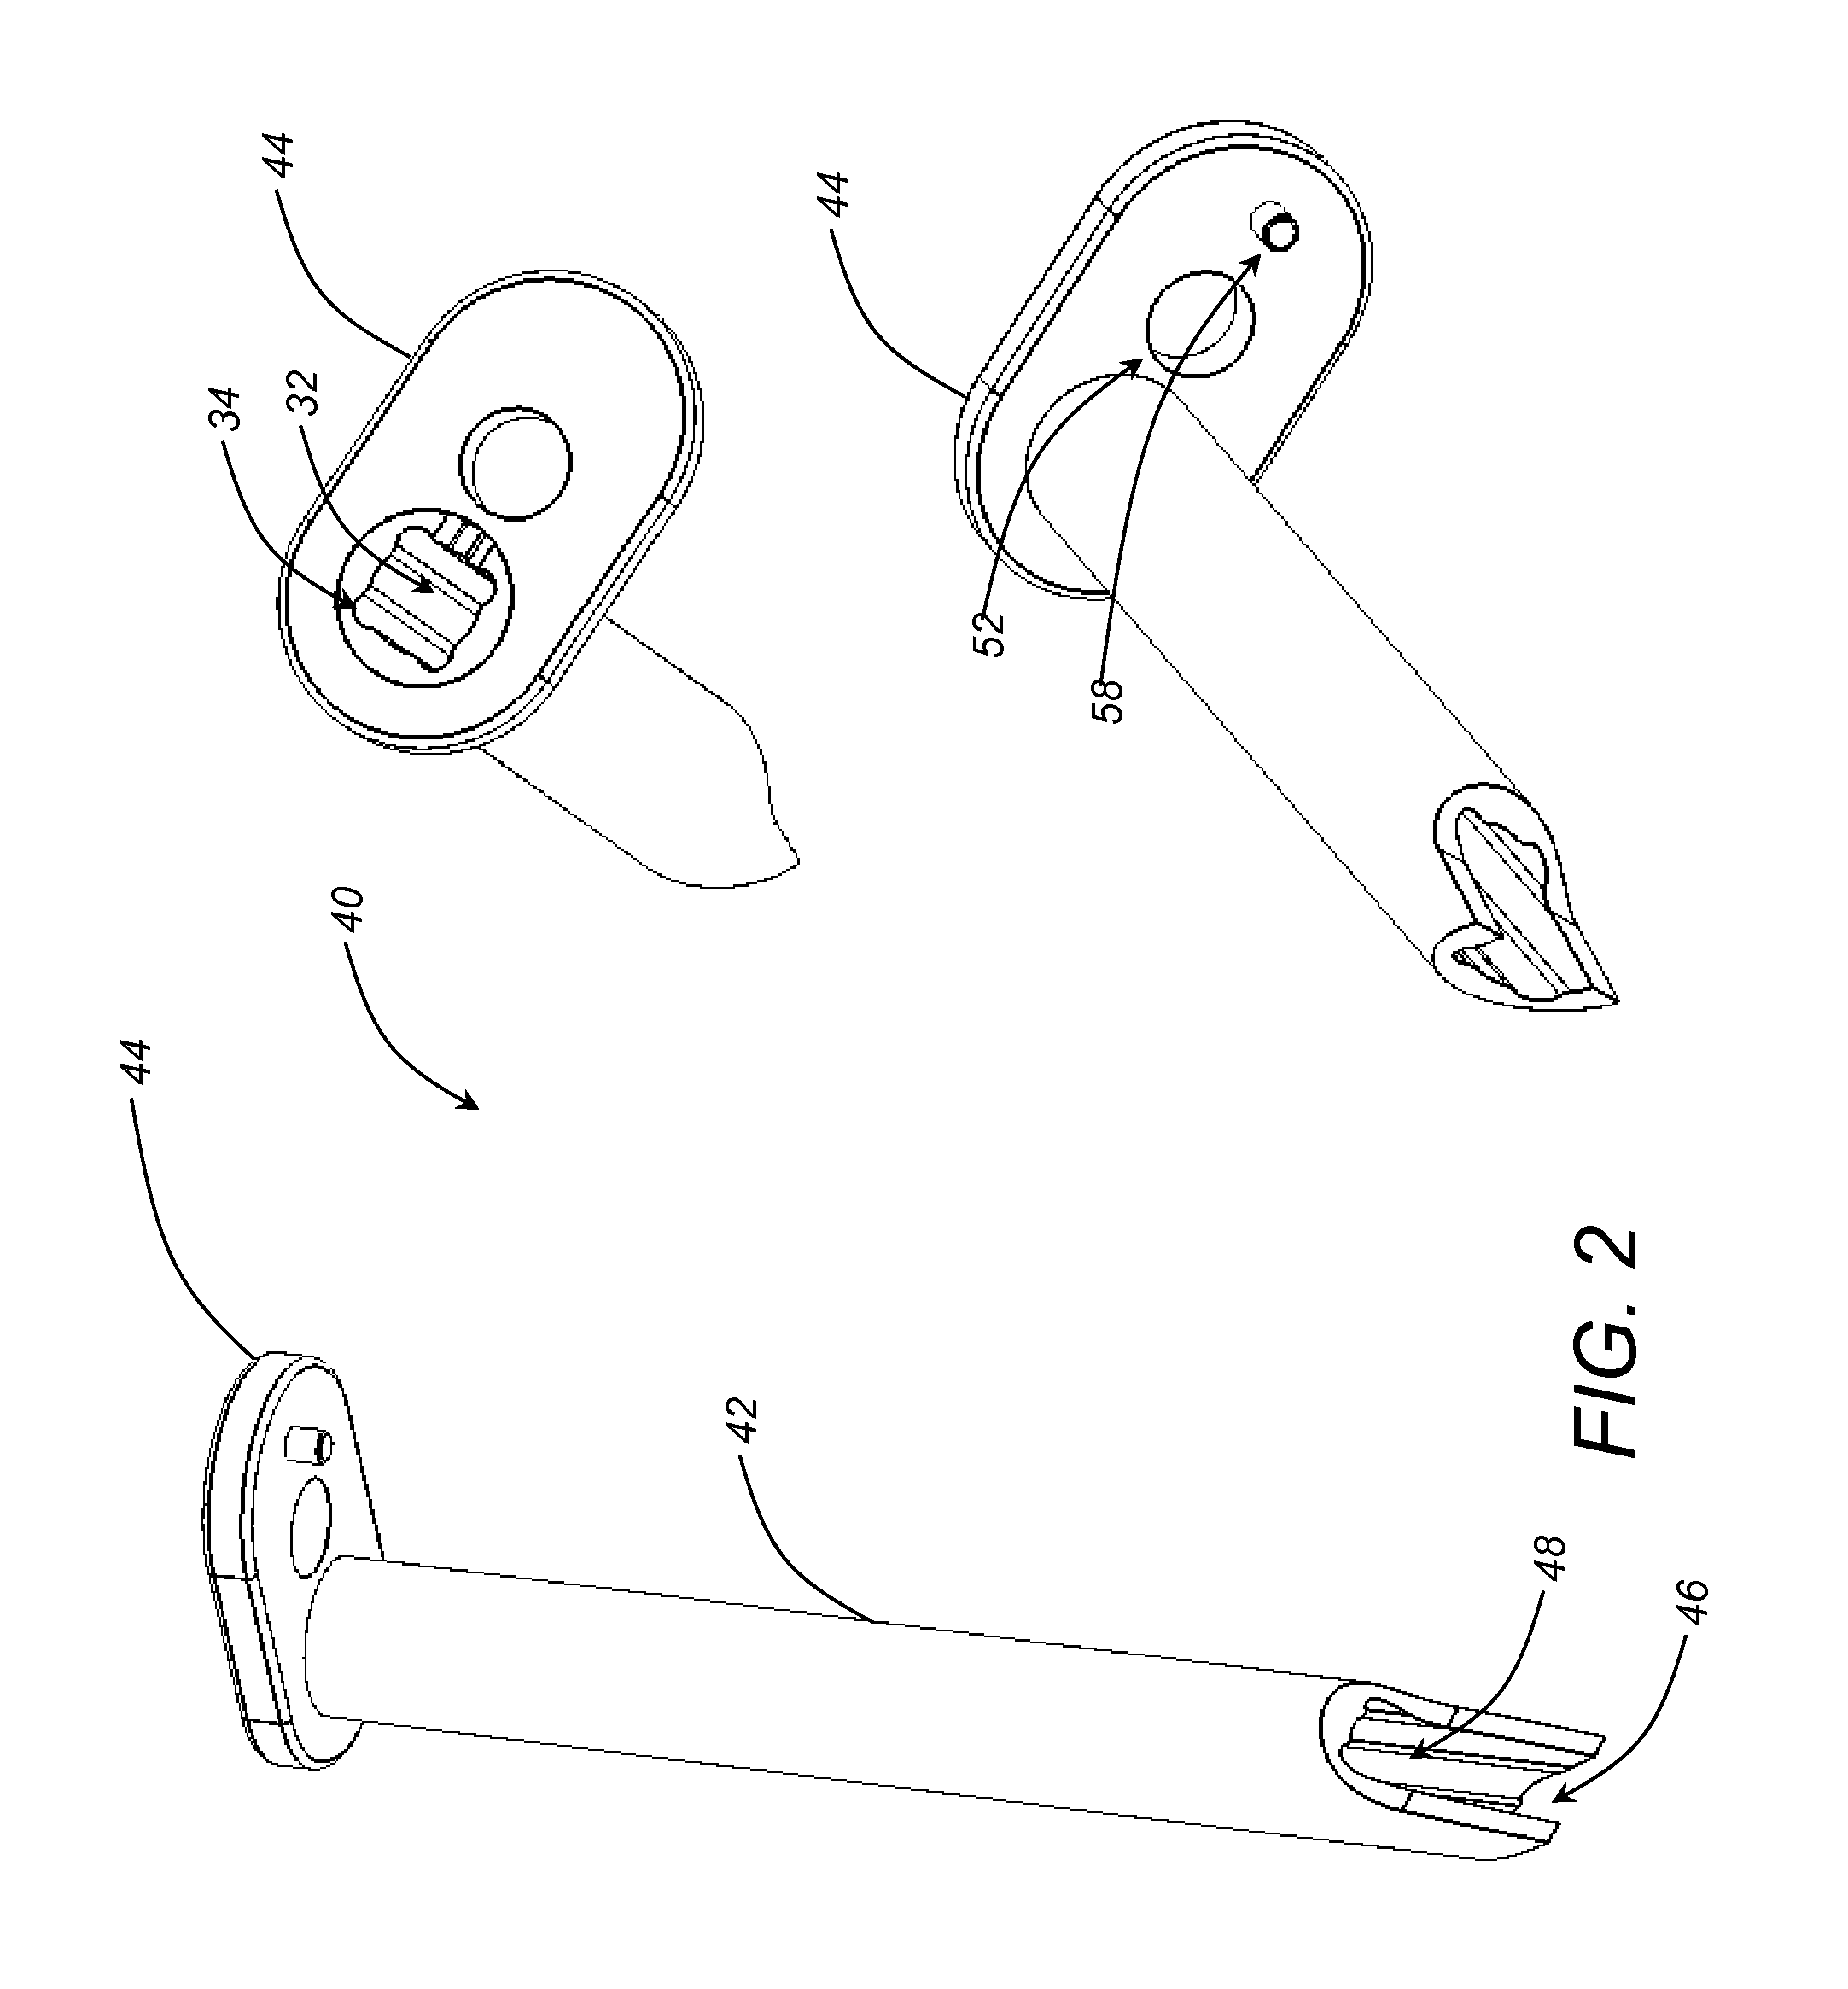 Sacroiliac joint fusion systems and methods